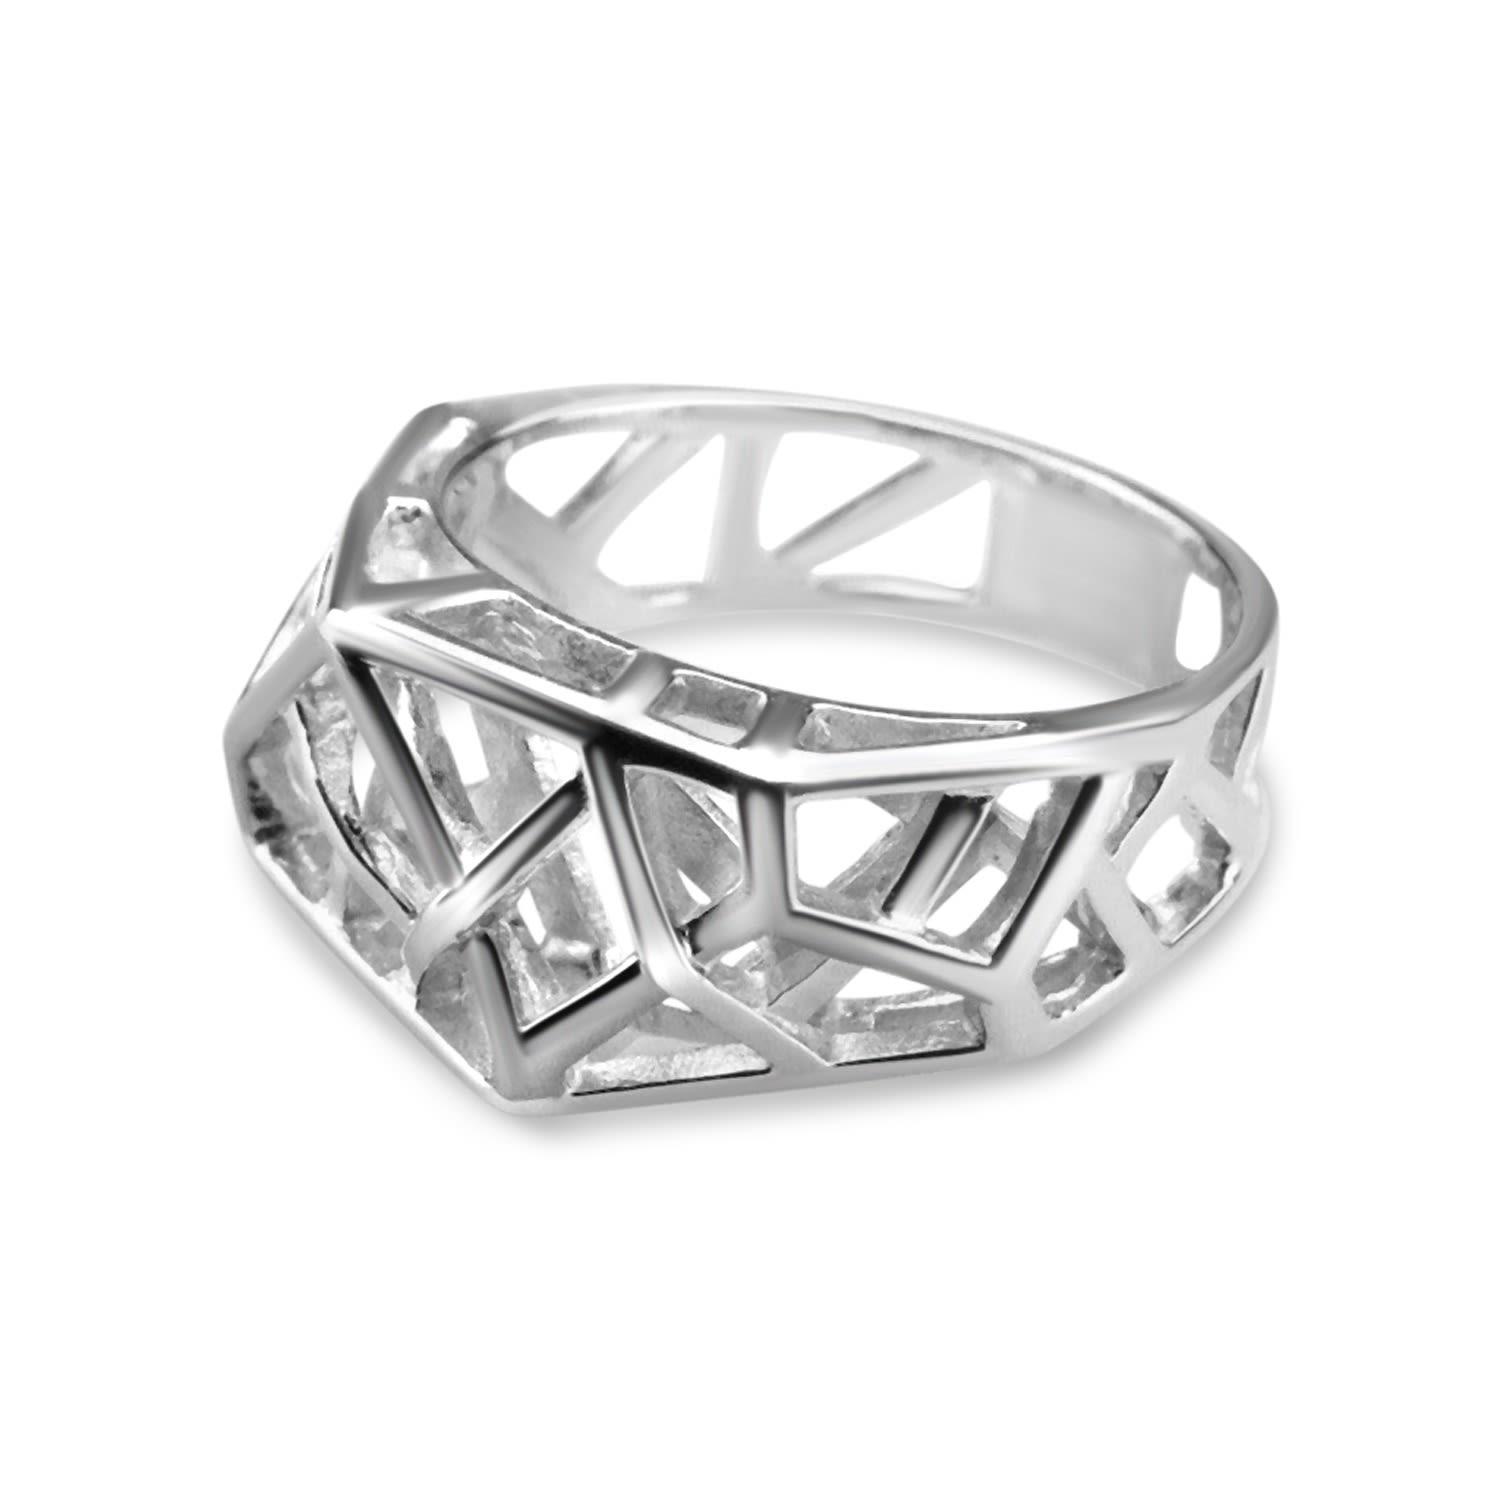 Bellus Domina White Gold Plated Crossover Ring in Silver (Metallic) - Lyst